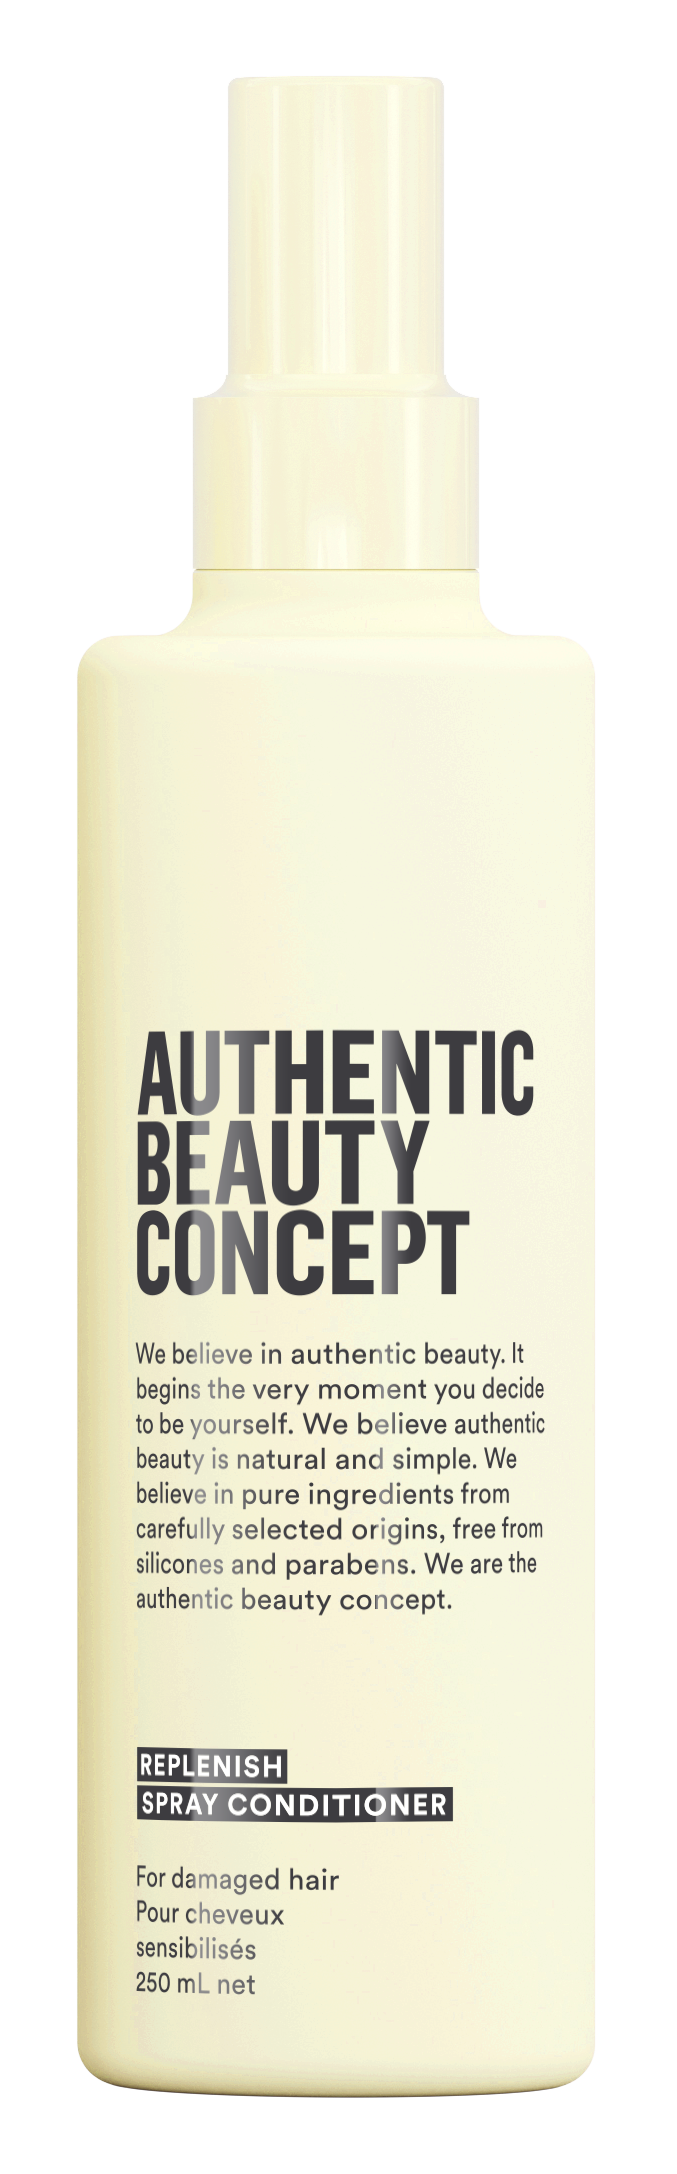 Eds Hair - Authentic Beauty Concept - Replenish Spray Conditioner 250ml